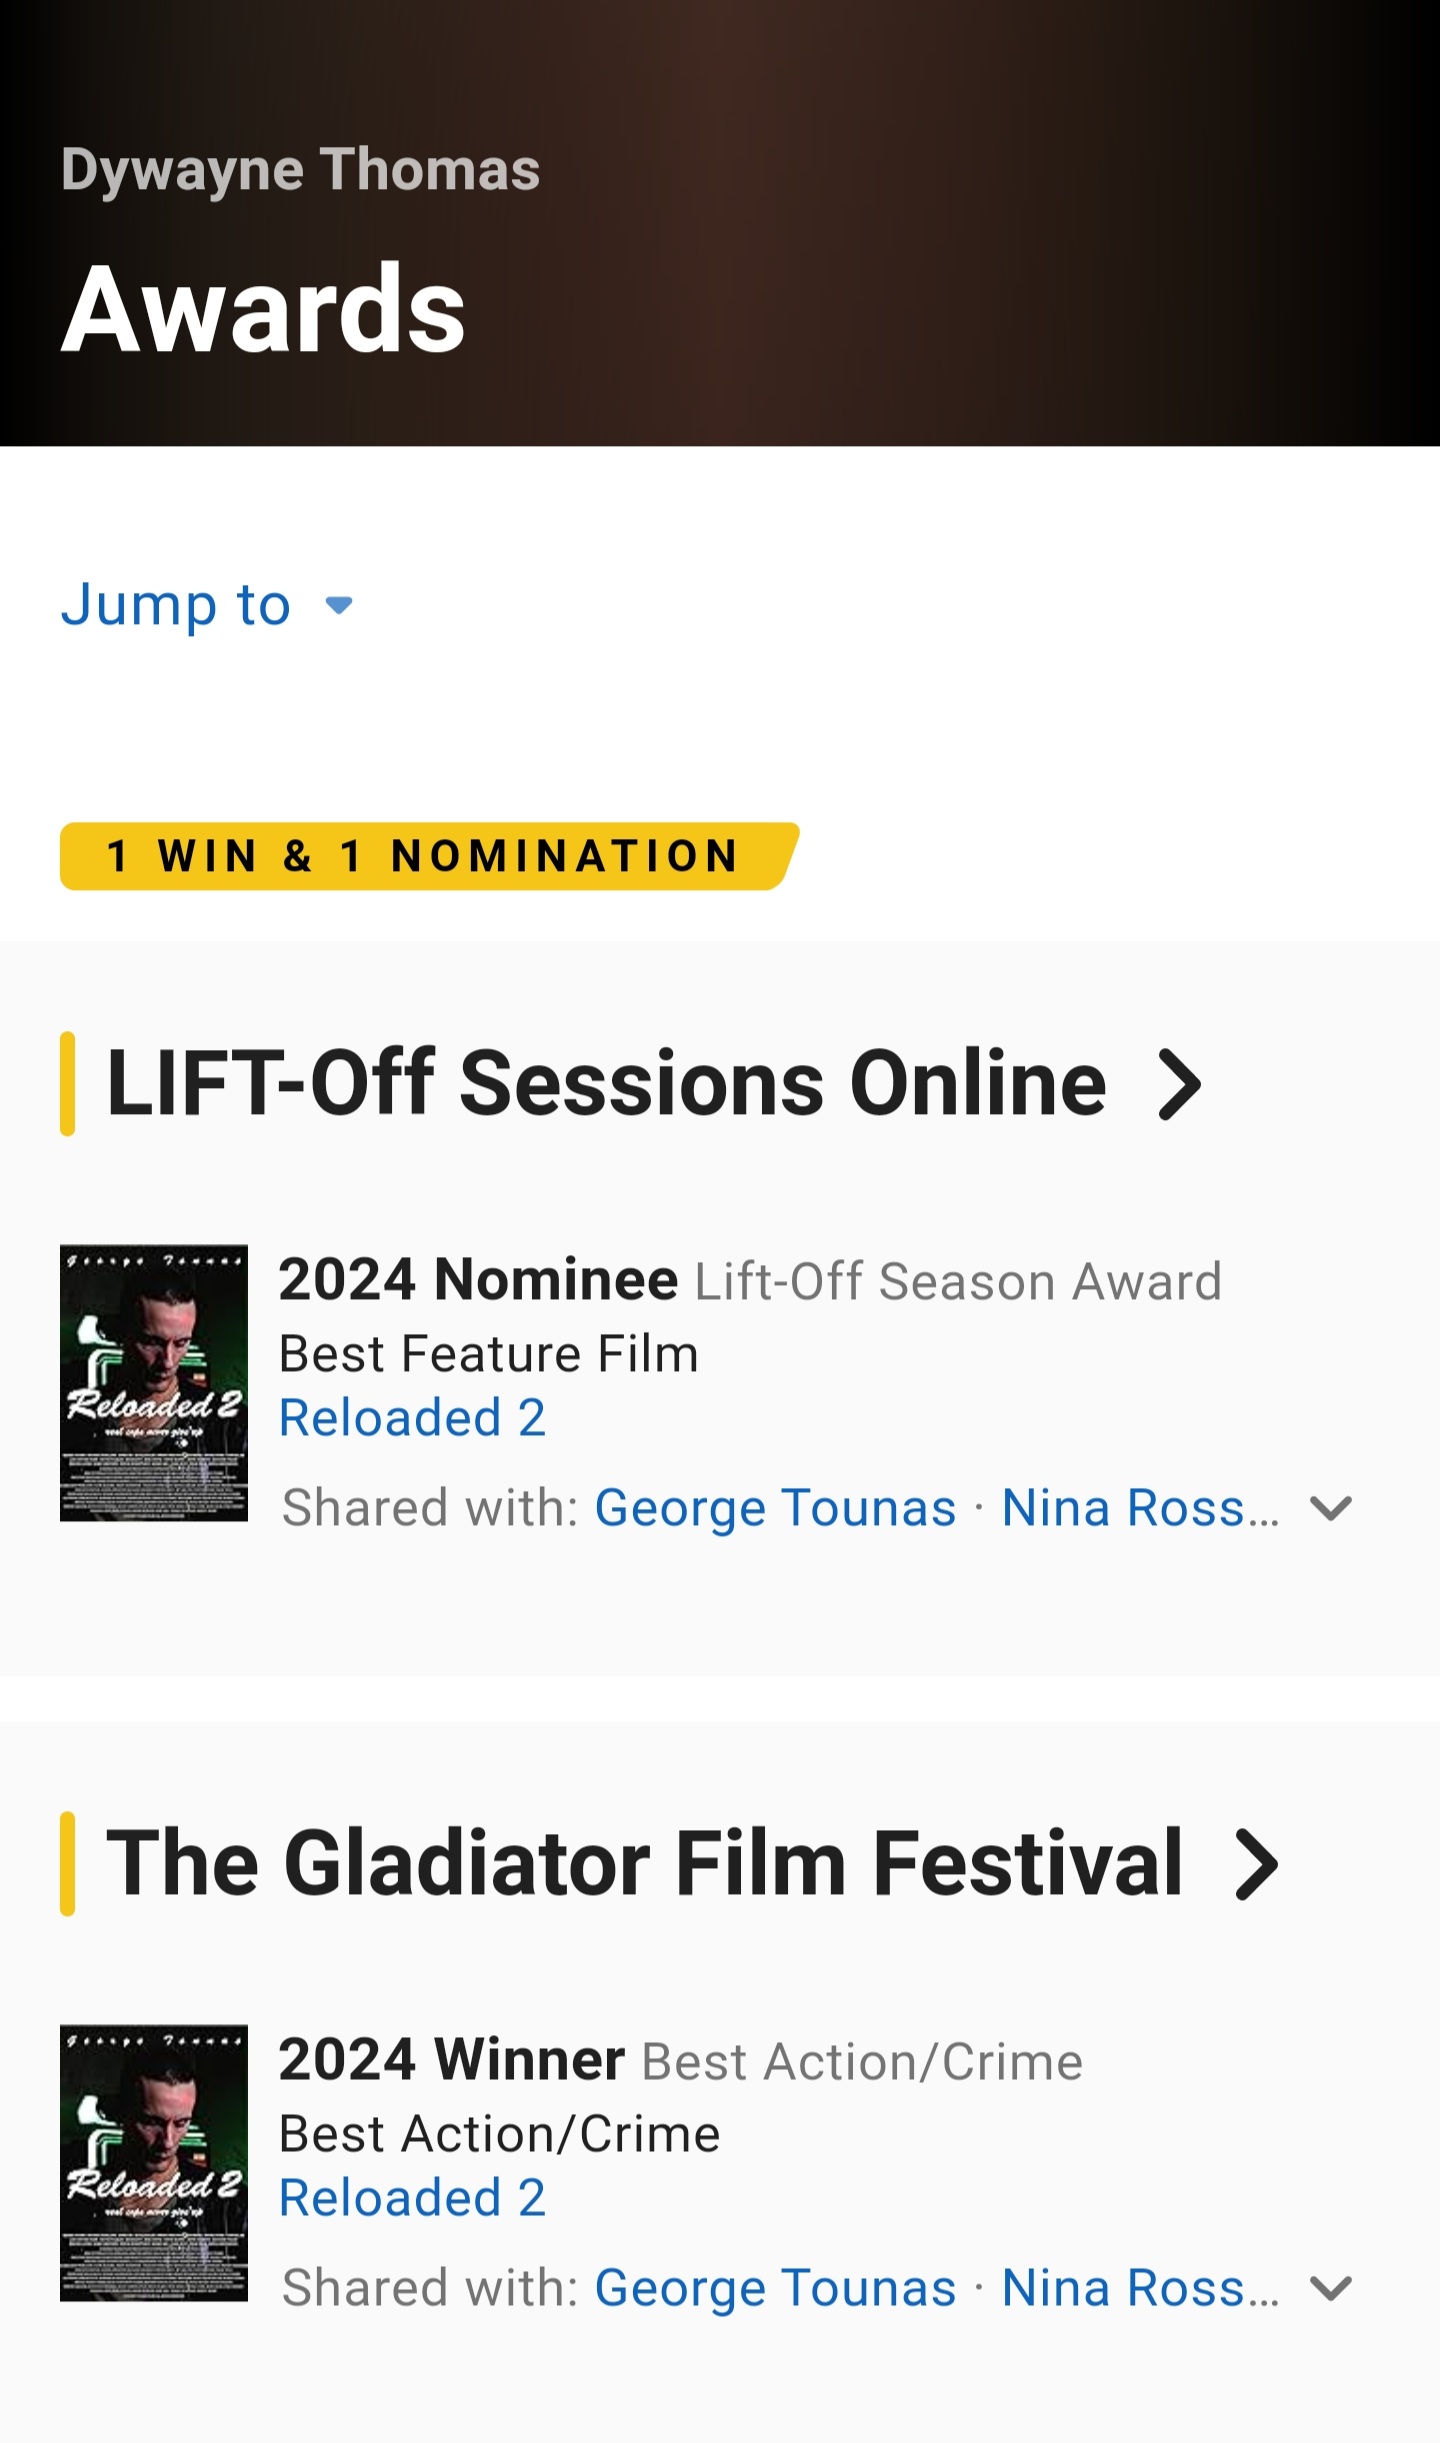 Winner in the Best Action/Crime category at The Gladiator Film Festival